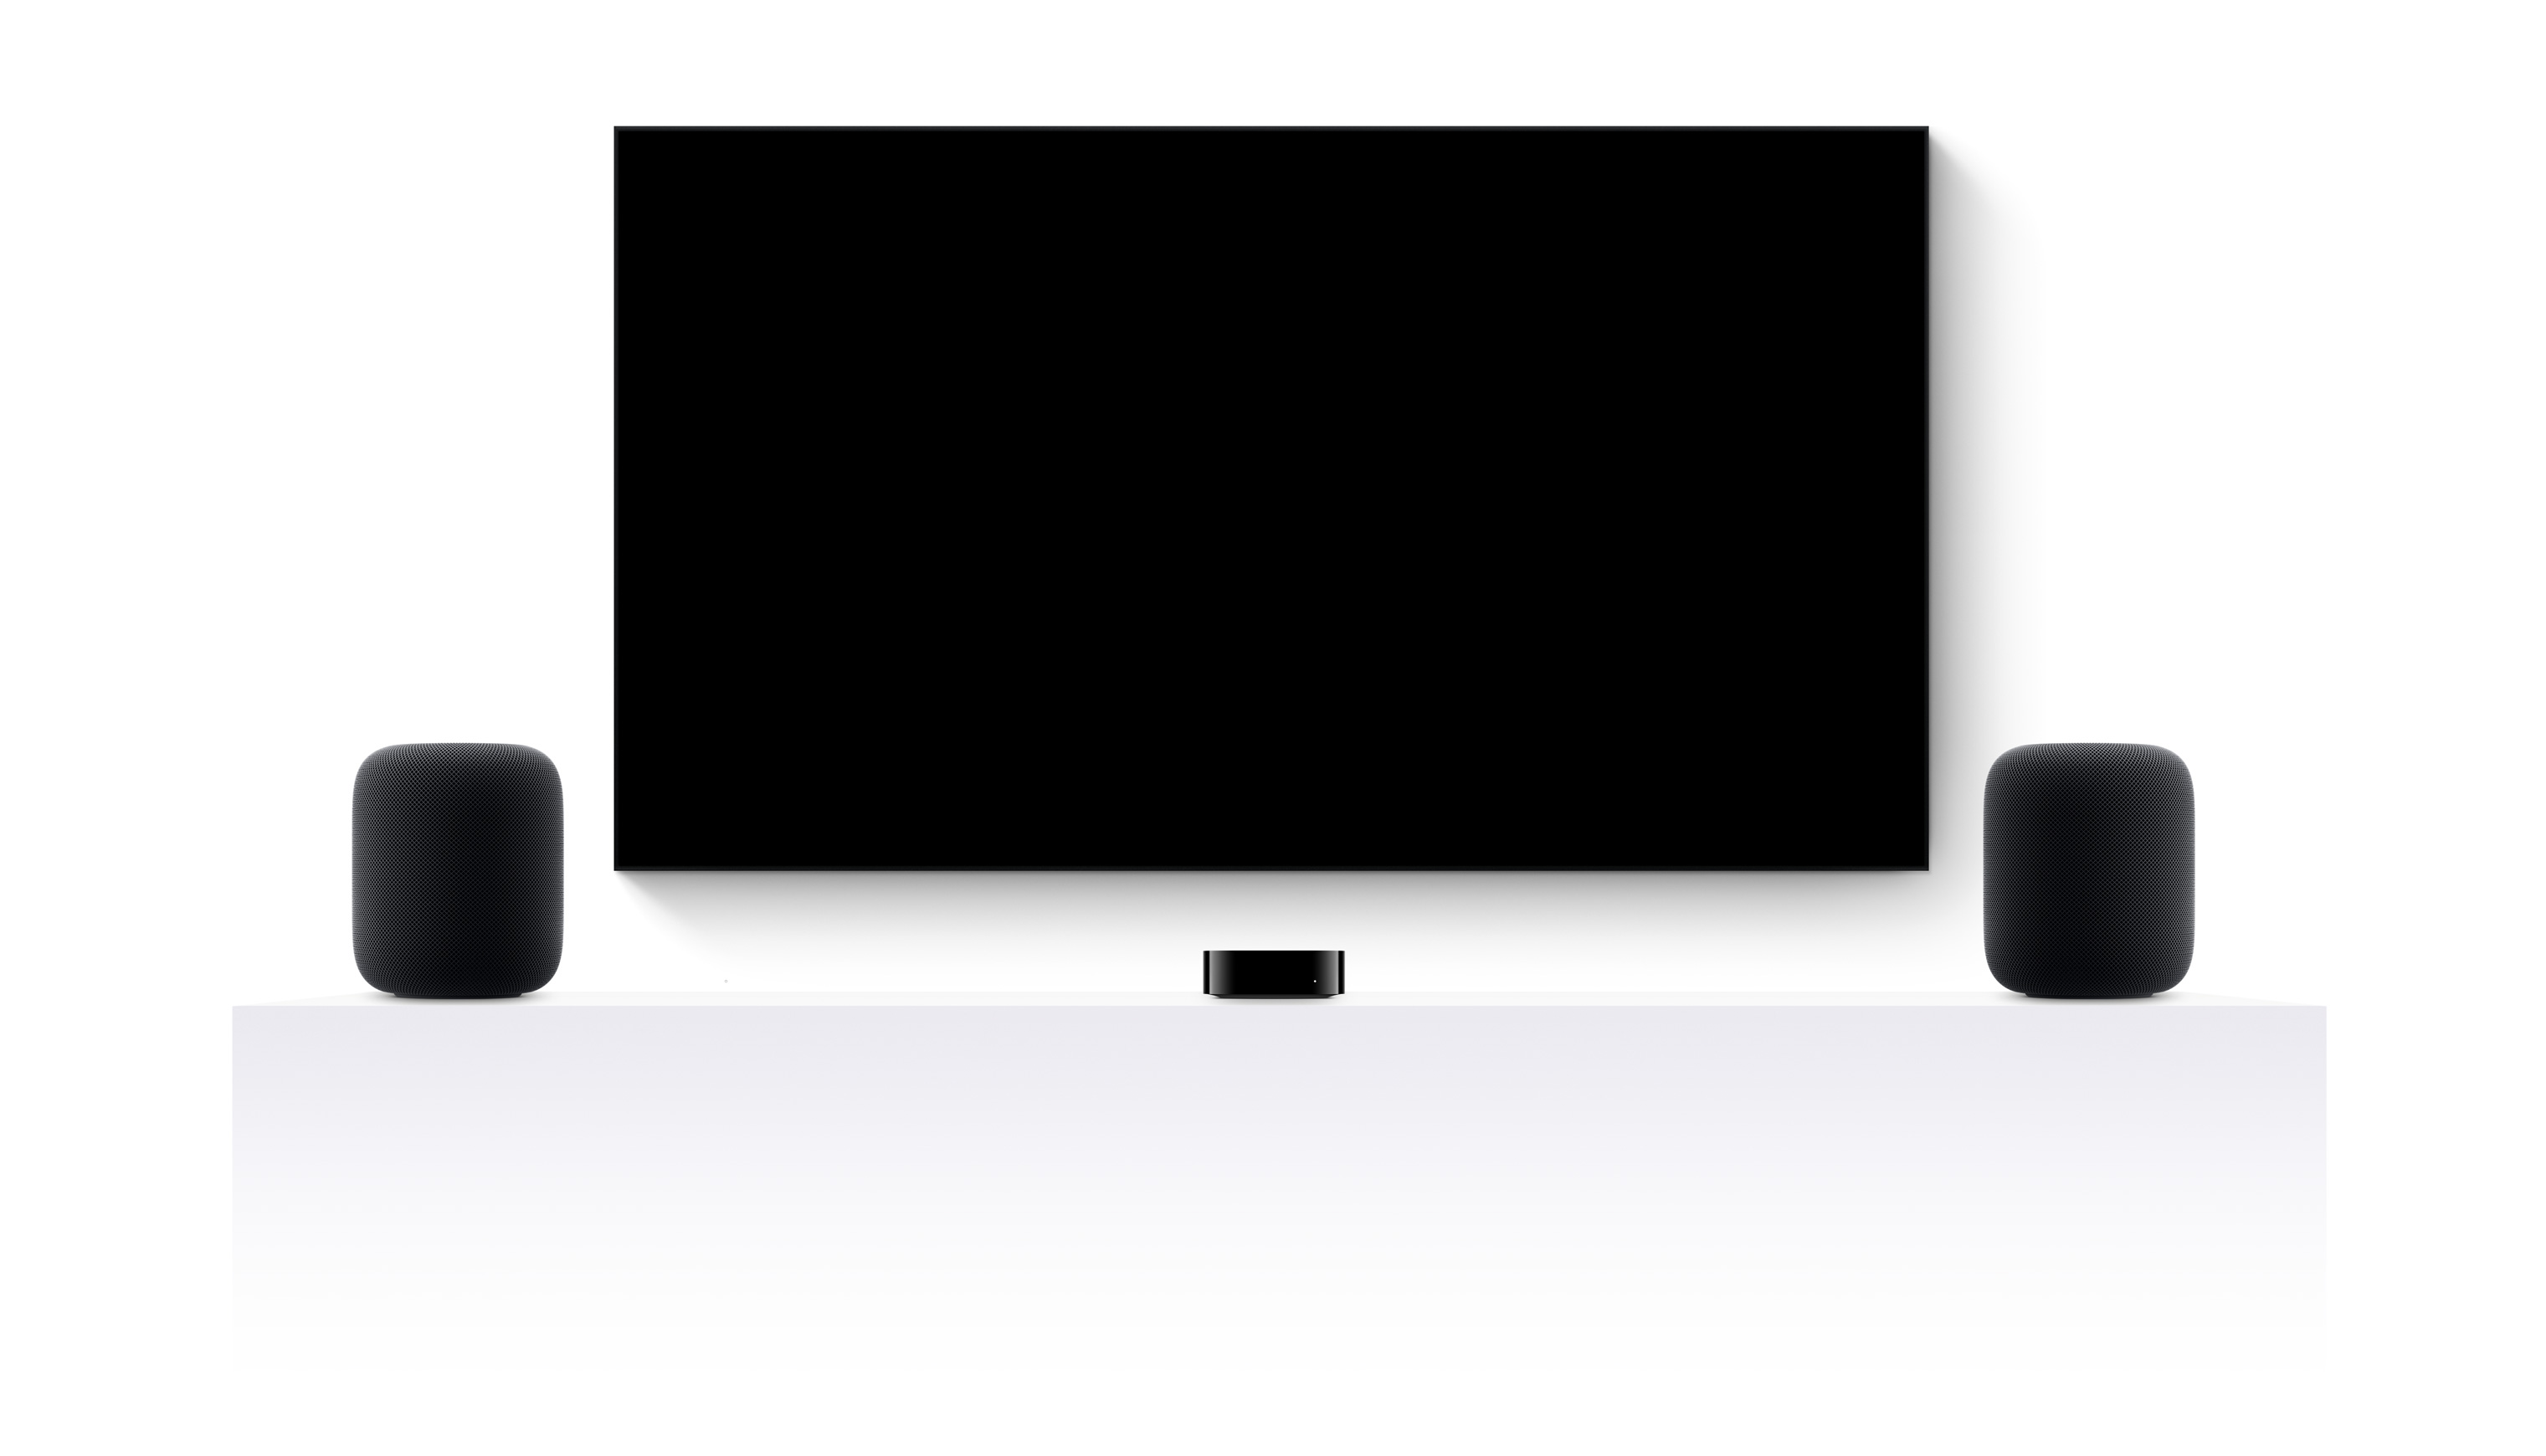 Apple TV 4k, two HomePods, and a flatscreen television showing an edited trailer of various Apple TV  movies and shows